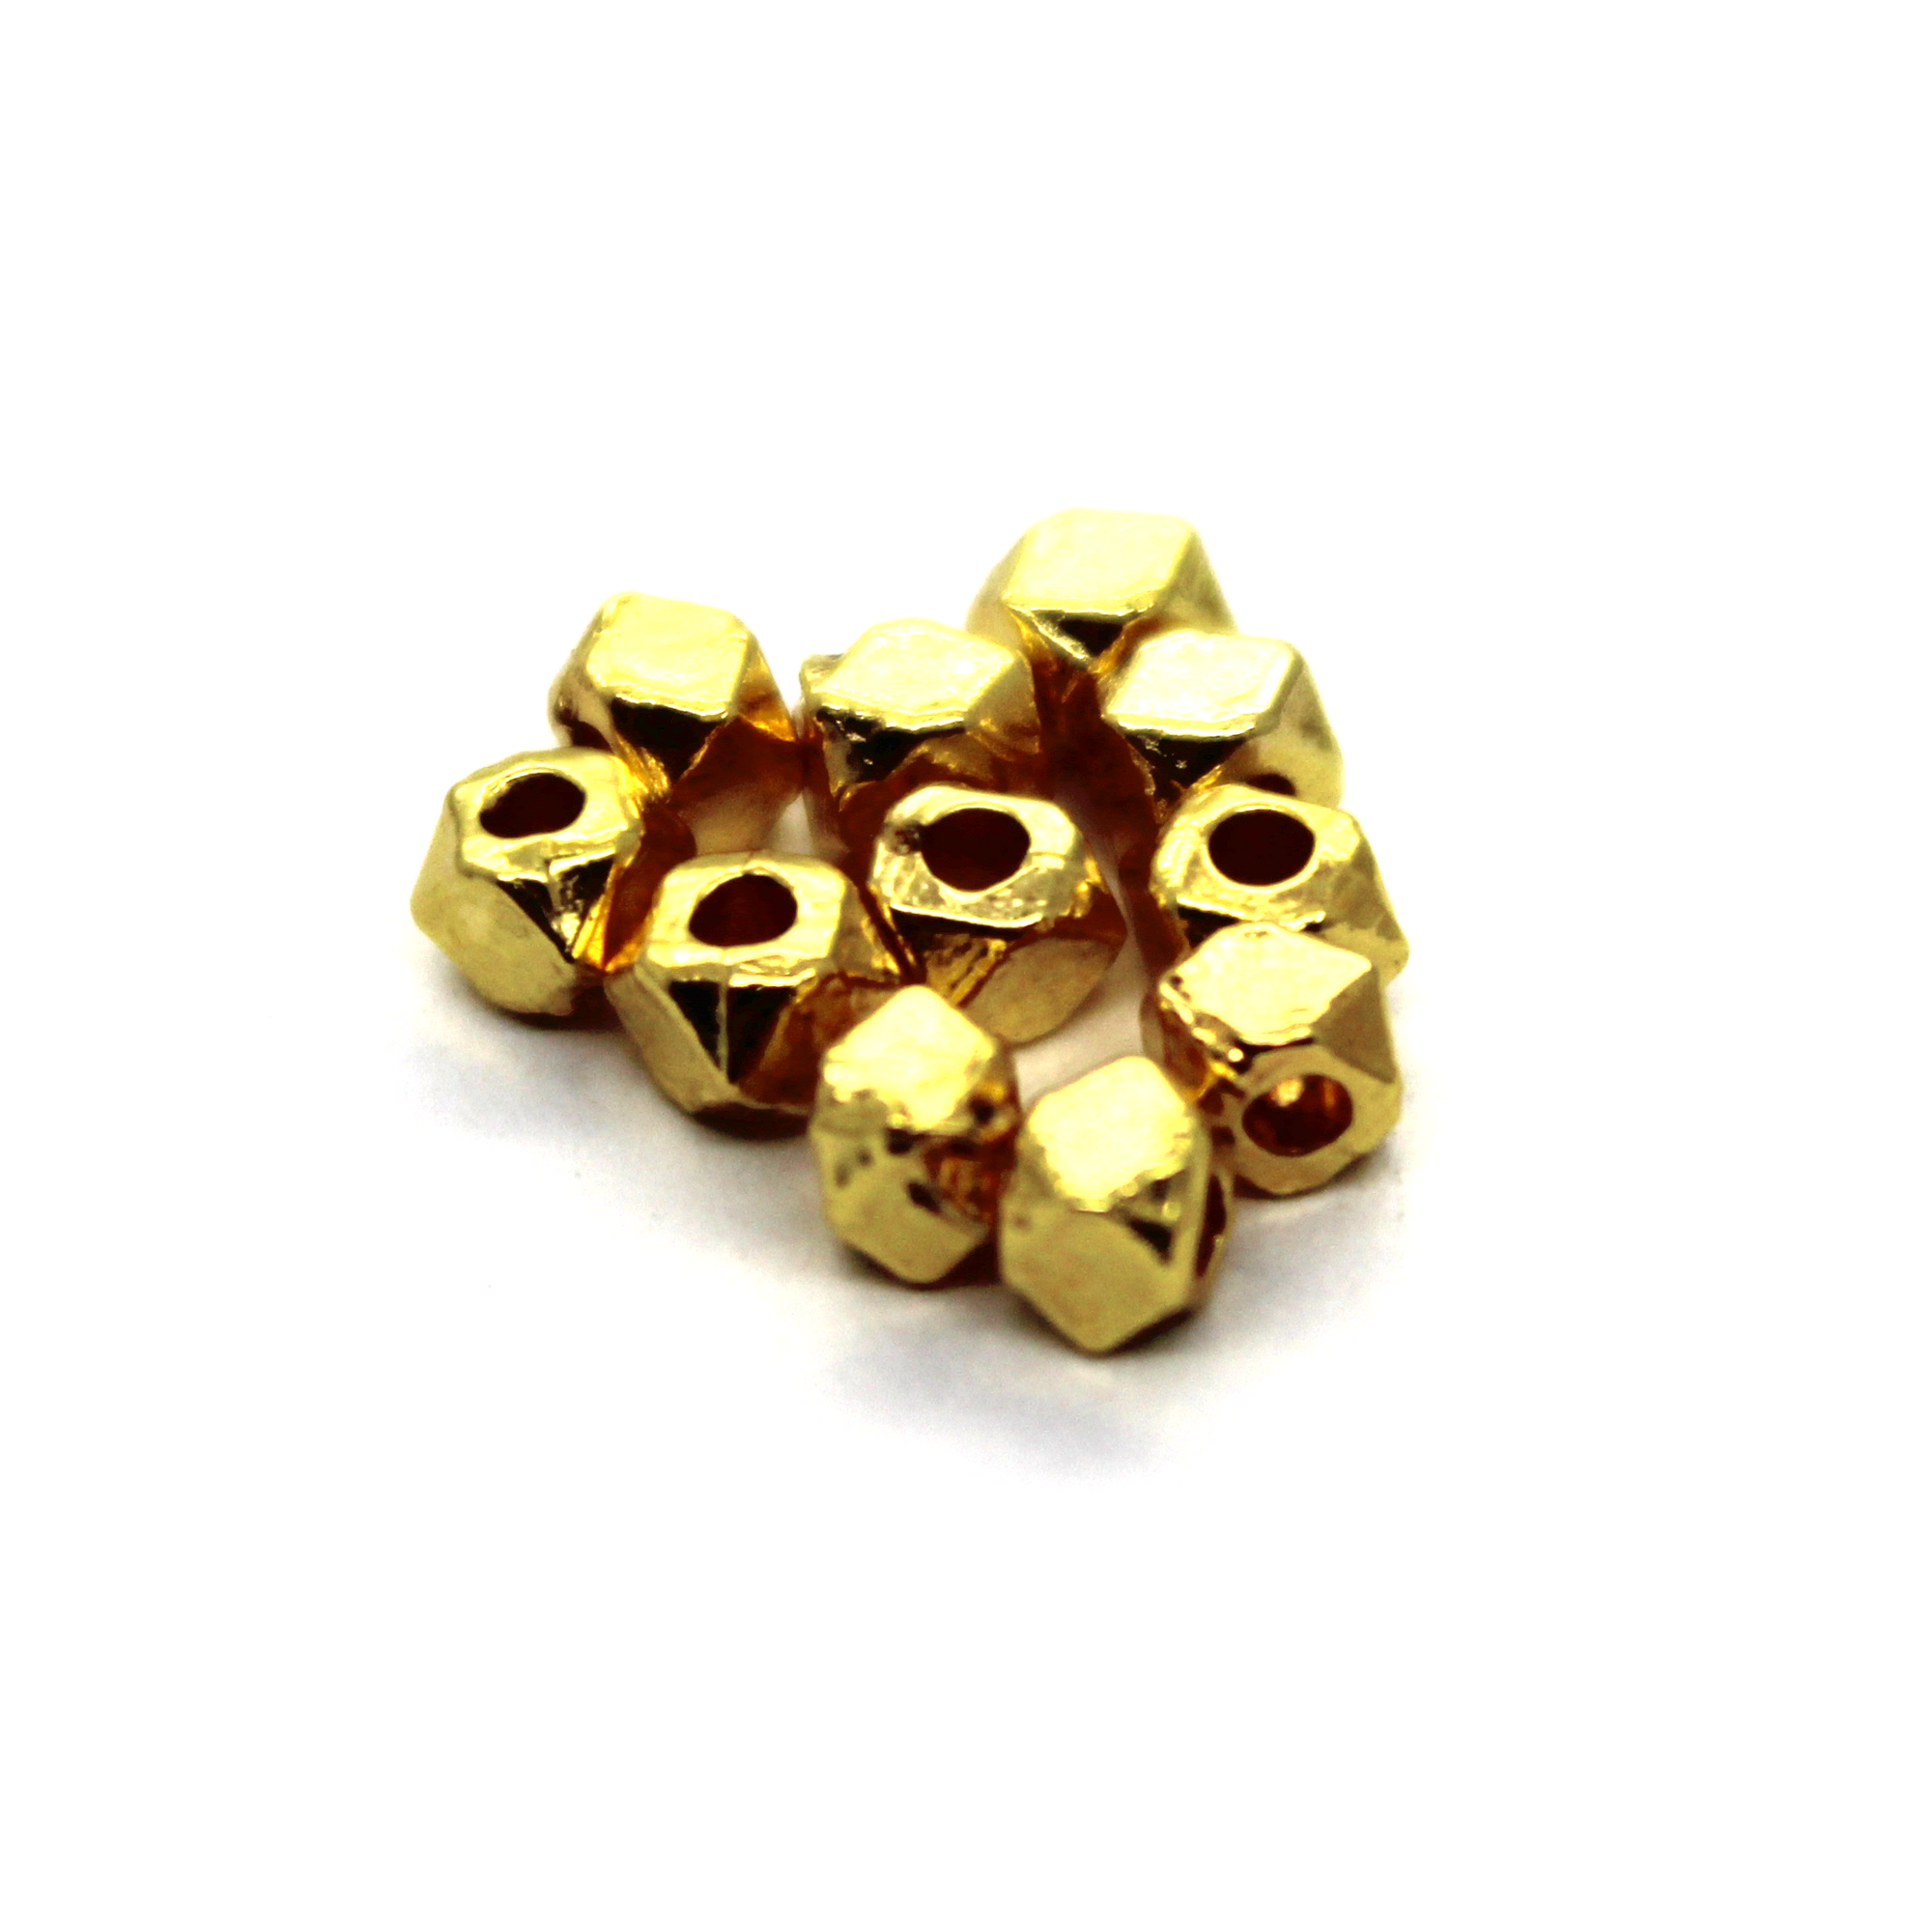 Spacers, Fracted Plain Spacer, Alloy, Bright Gold, 3mm x 3mm Sold Per pkg of 30